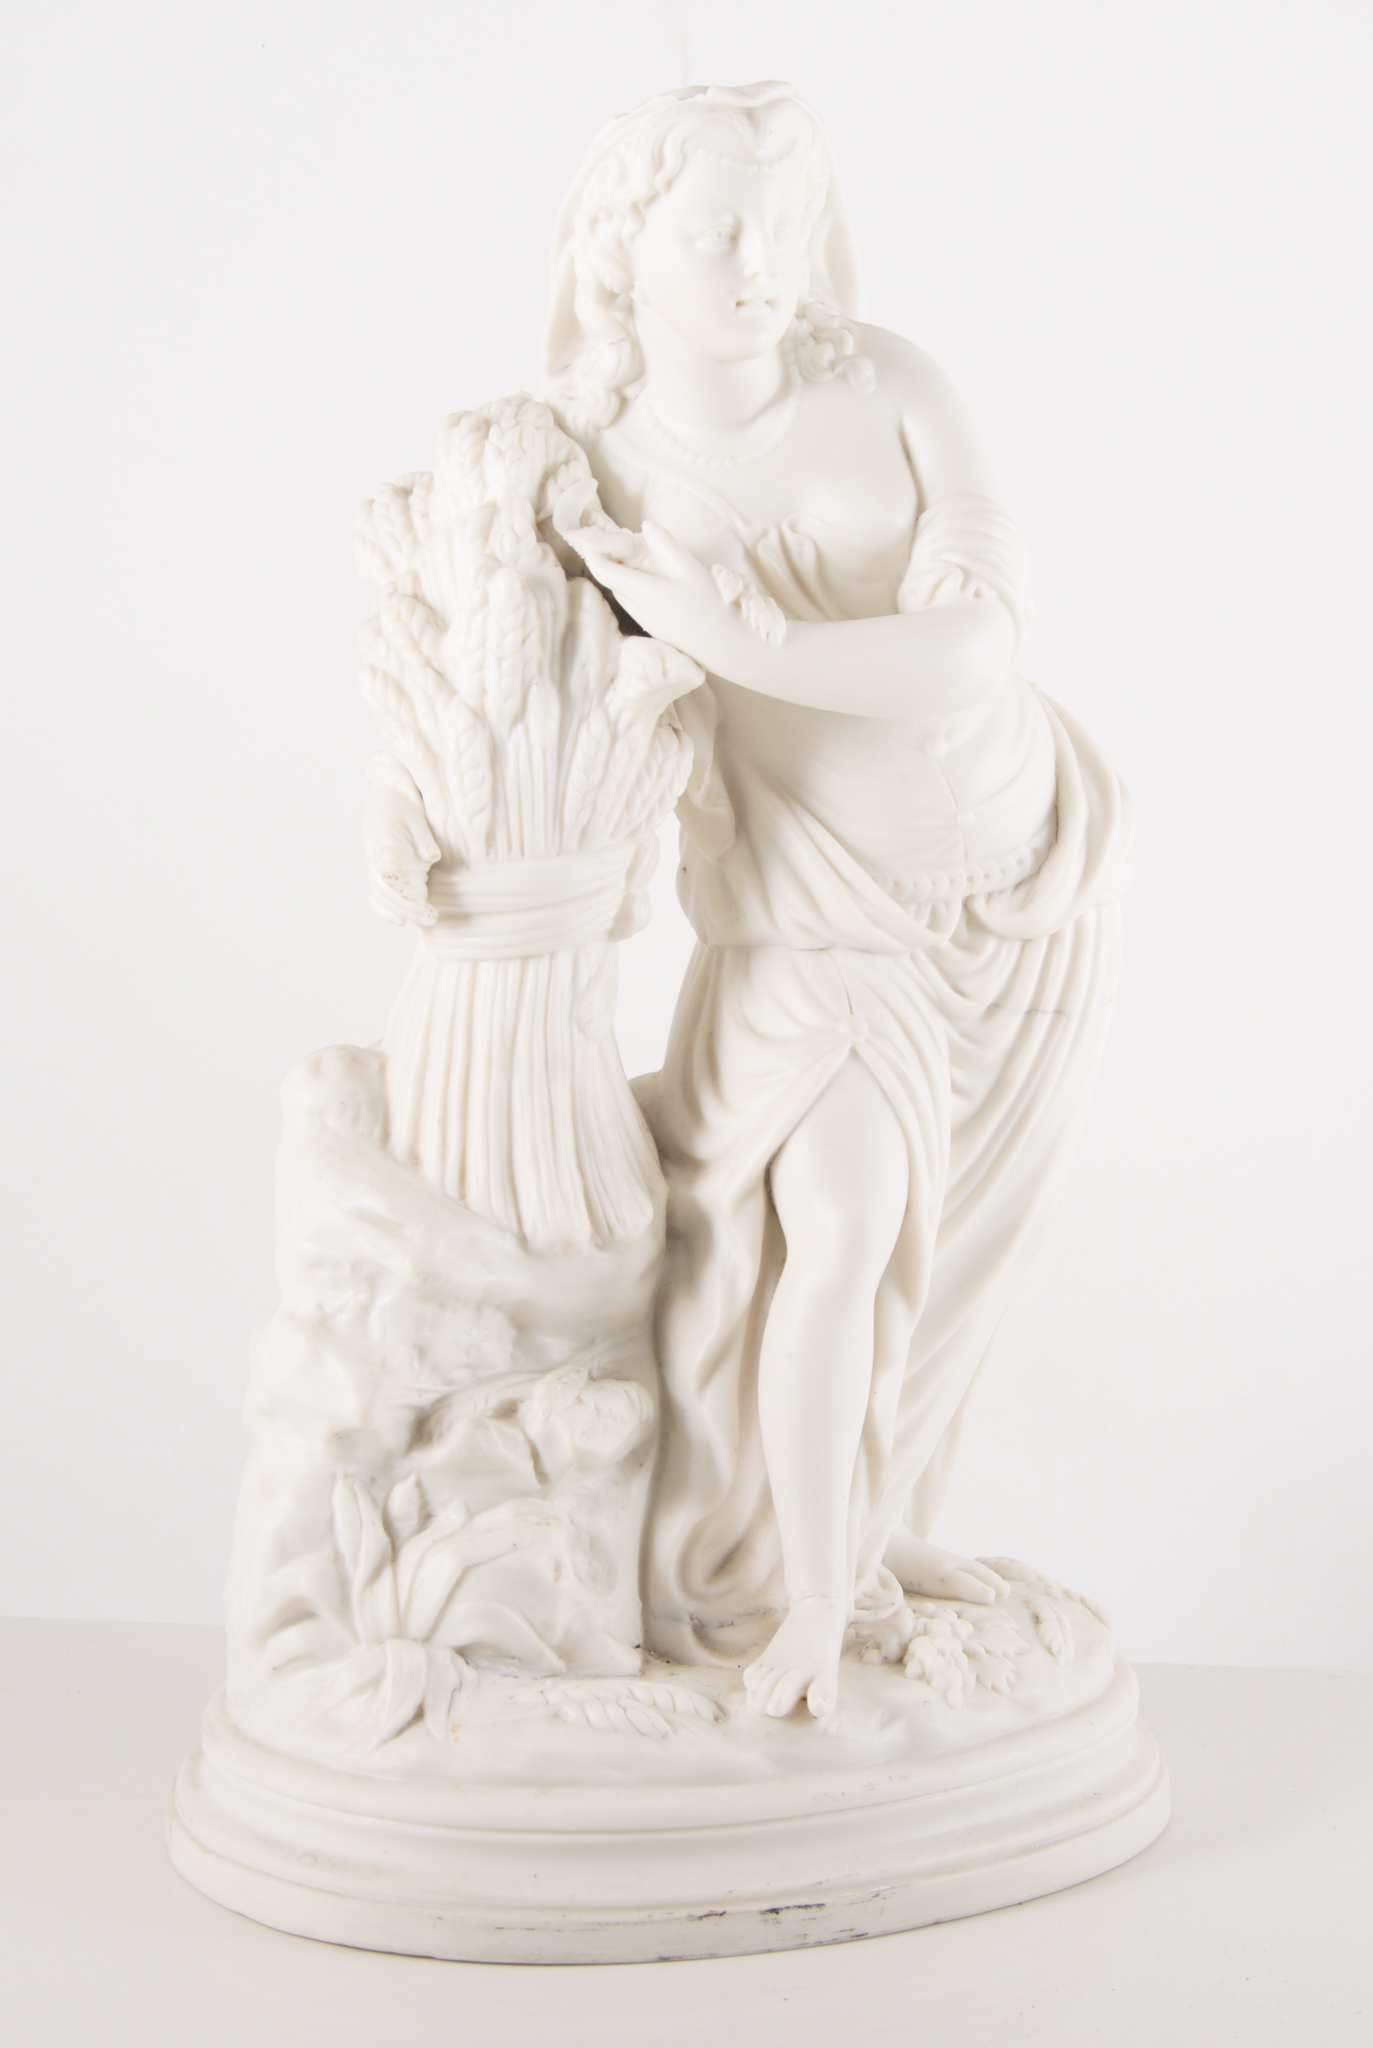 Victorian Parian figure, 'Harvest', overall plinth height 34cm, damaged.